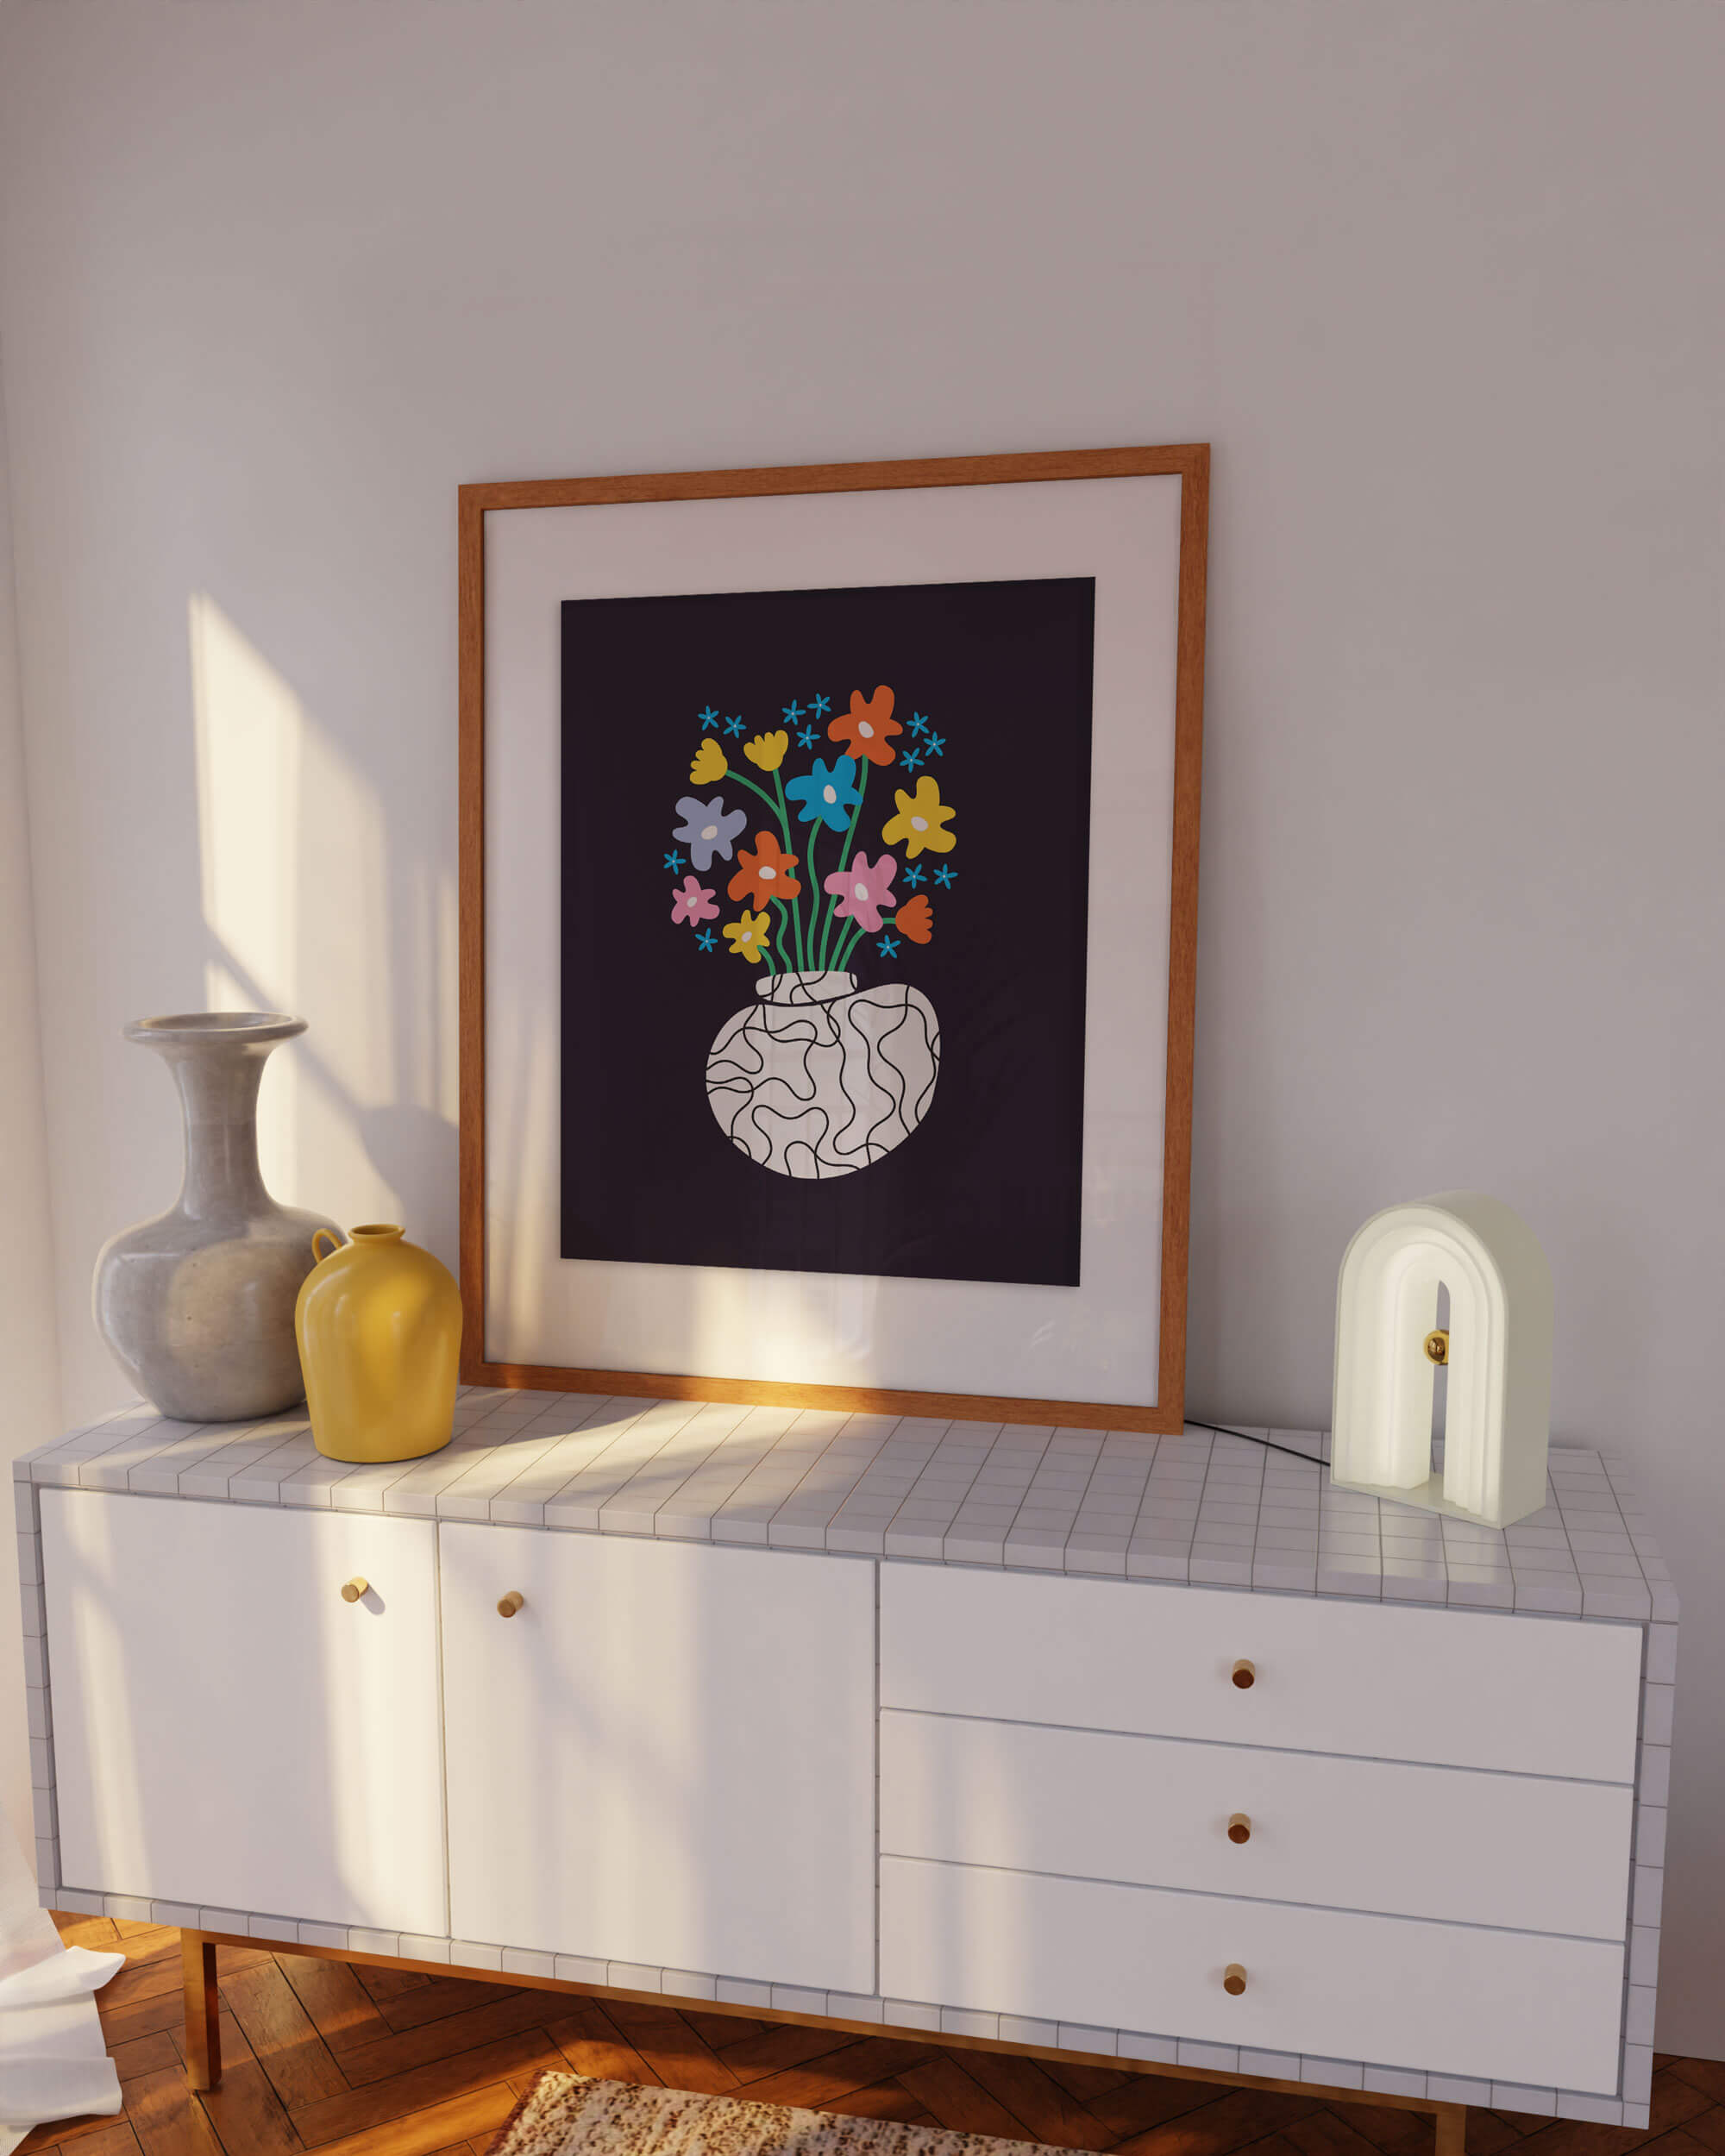 Modern vase illustration with black and white squiggly pattern filled vase with colorful squiggly flowers. Big bold colorful flower poster with vaguely mid-century inspired art. Made in USA by My Darlin' @mydarlin_bk